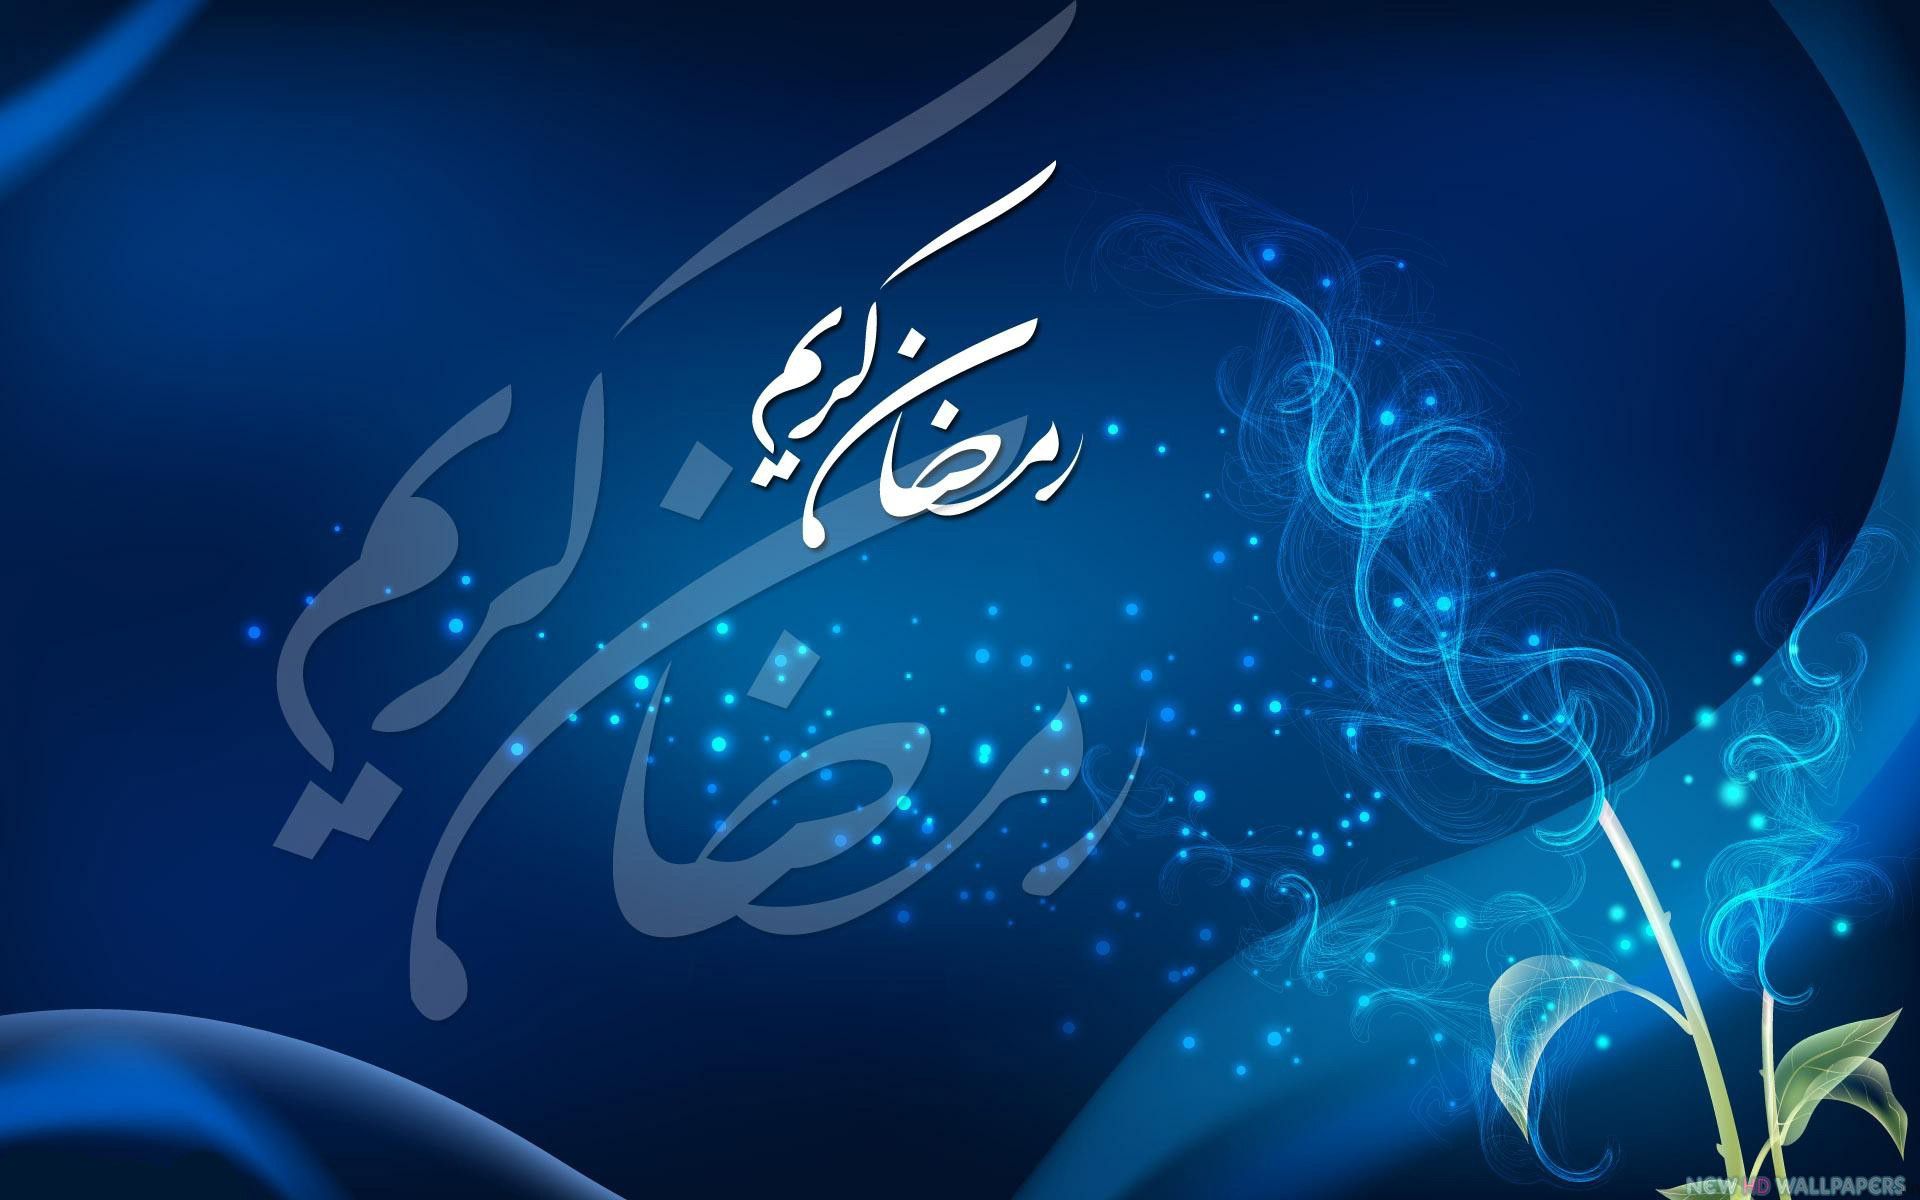 Best Ramadan Greeting Card Designs and Backgrounds | CGfrog